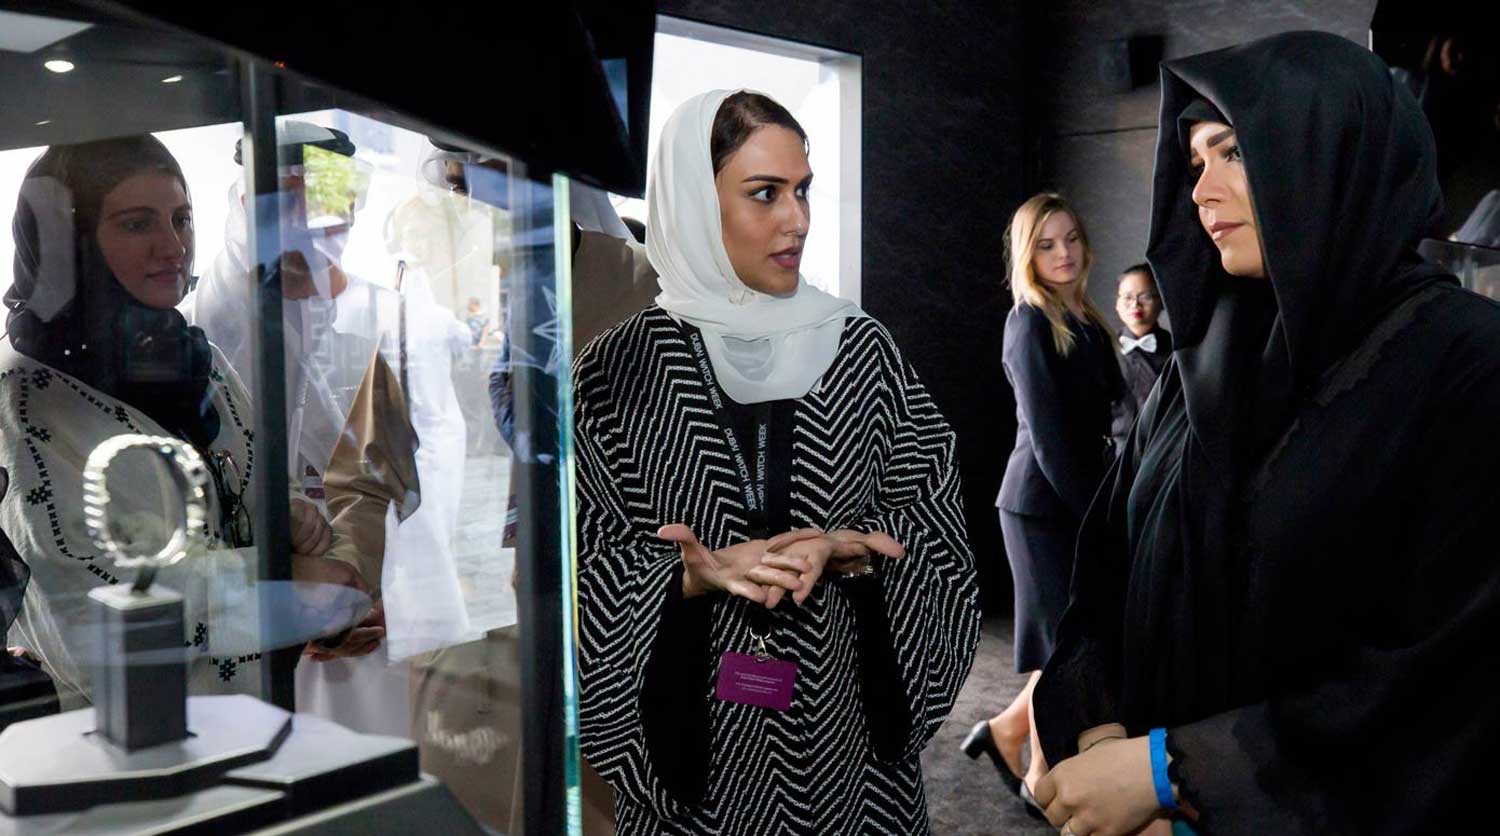 Hind has been an outspoken advocate for positive change with regard to how women in the Middle East learn about and eventually purchase timepieces.